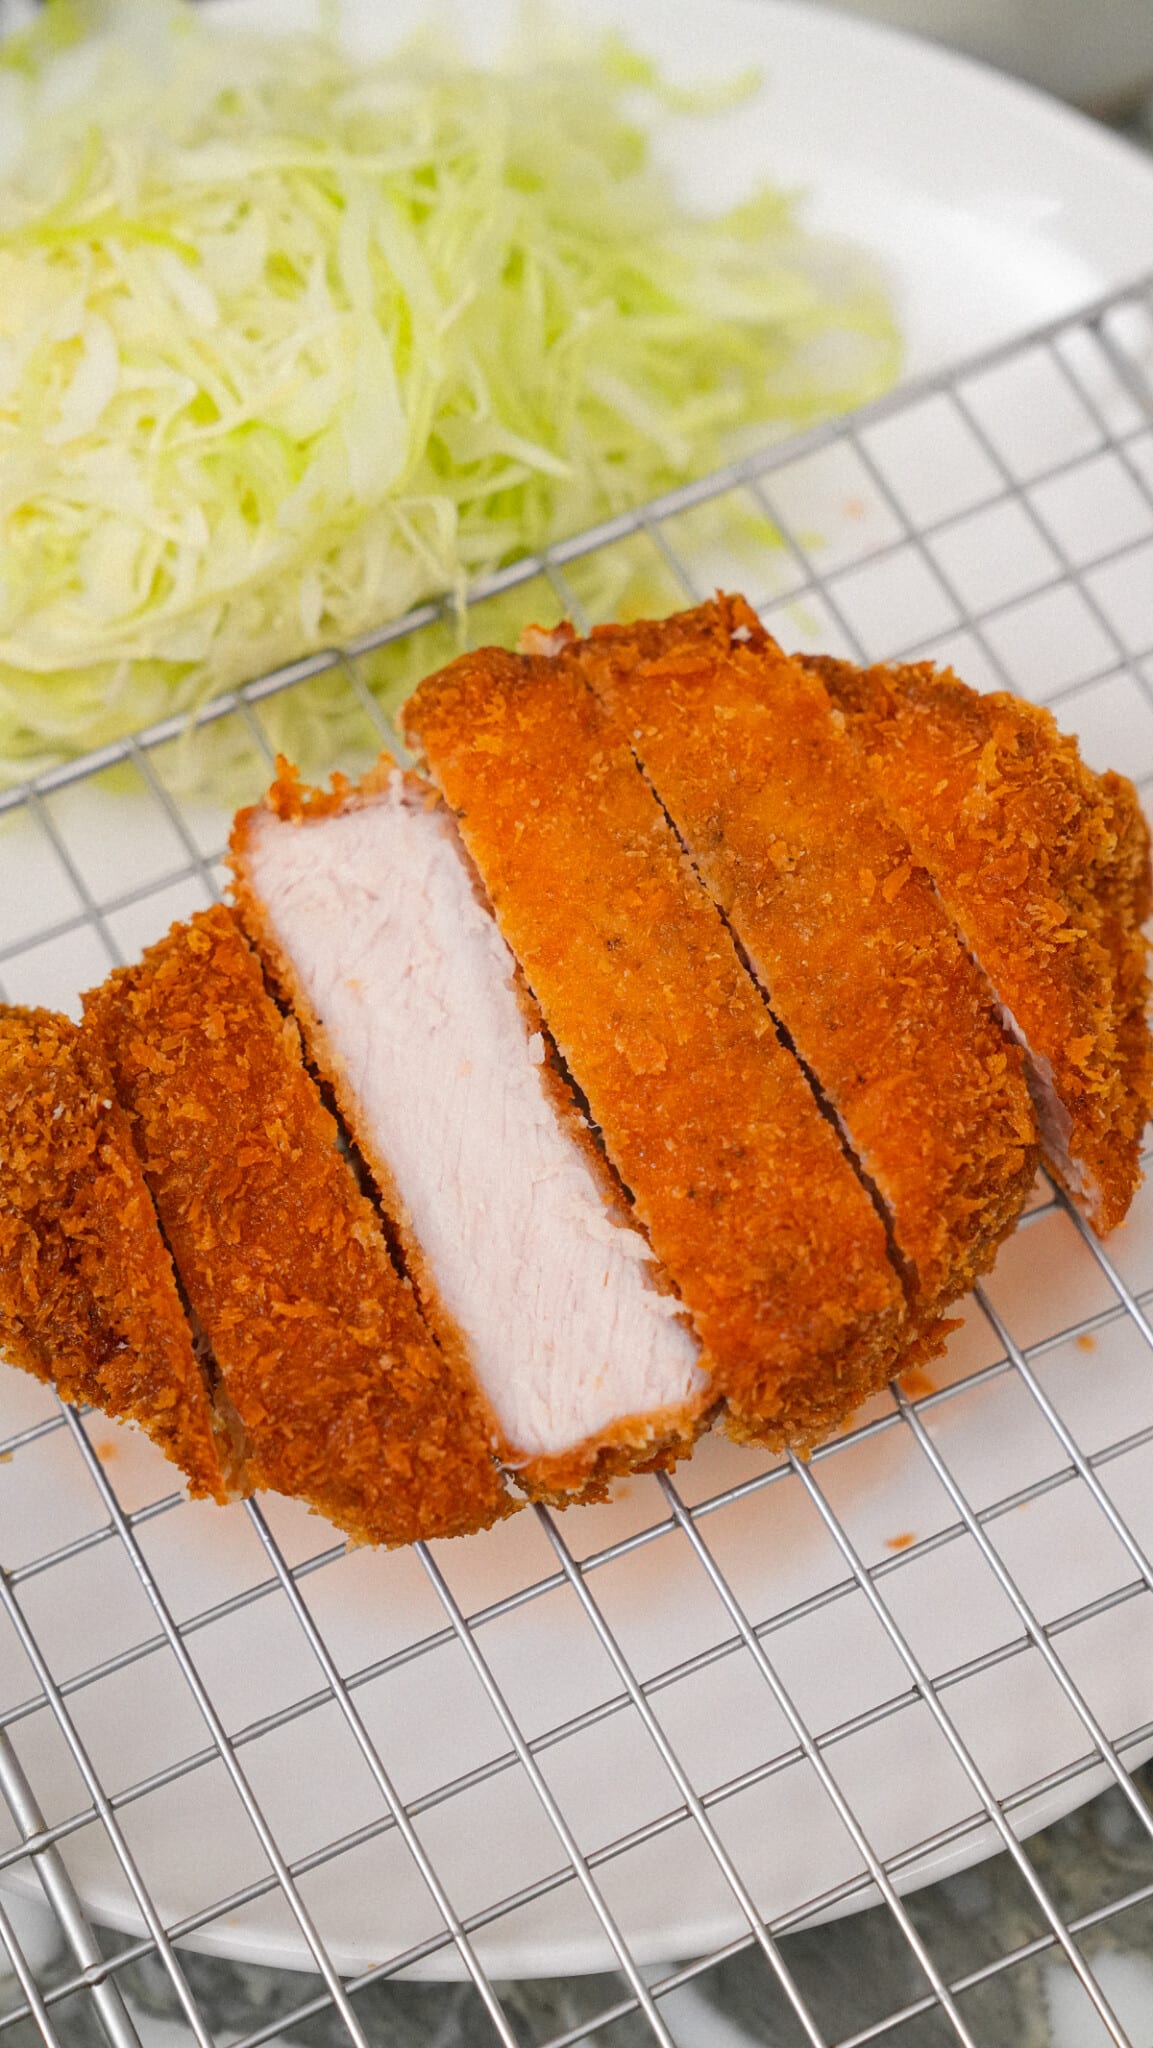 Tonkatsu on a plate with shredded cabbage.